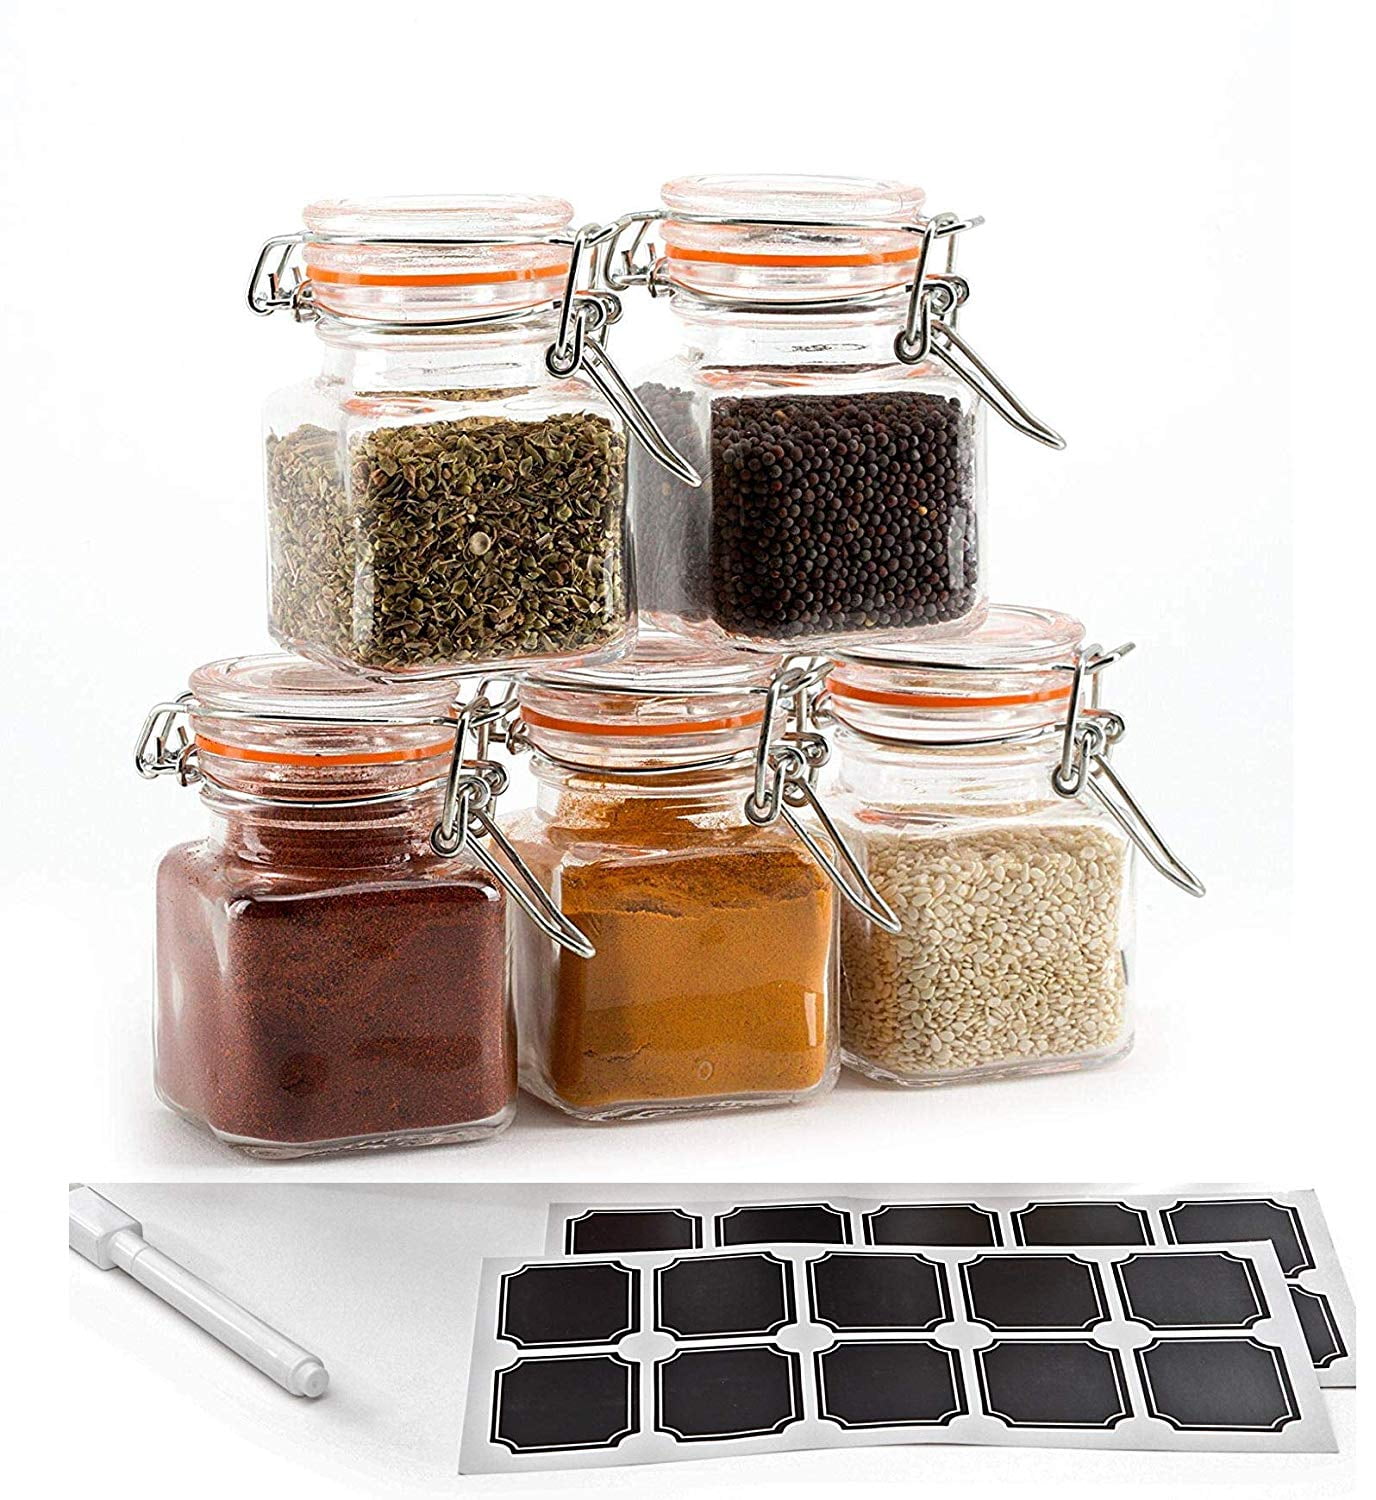 Lid 6.5 oz 3-piece Deckel Silber Jam Jars Etc Viva Haushaltswaren Set of Glass Spice Jars with Screw Top Glasses 192 ml Can Be Used As A Storage Glass Preserving Jars with Scoop